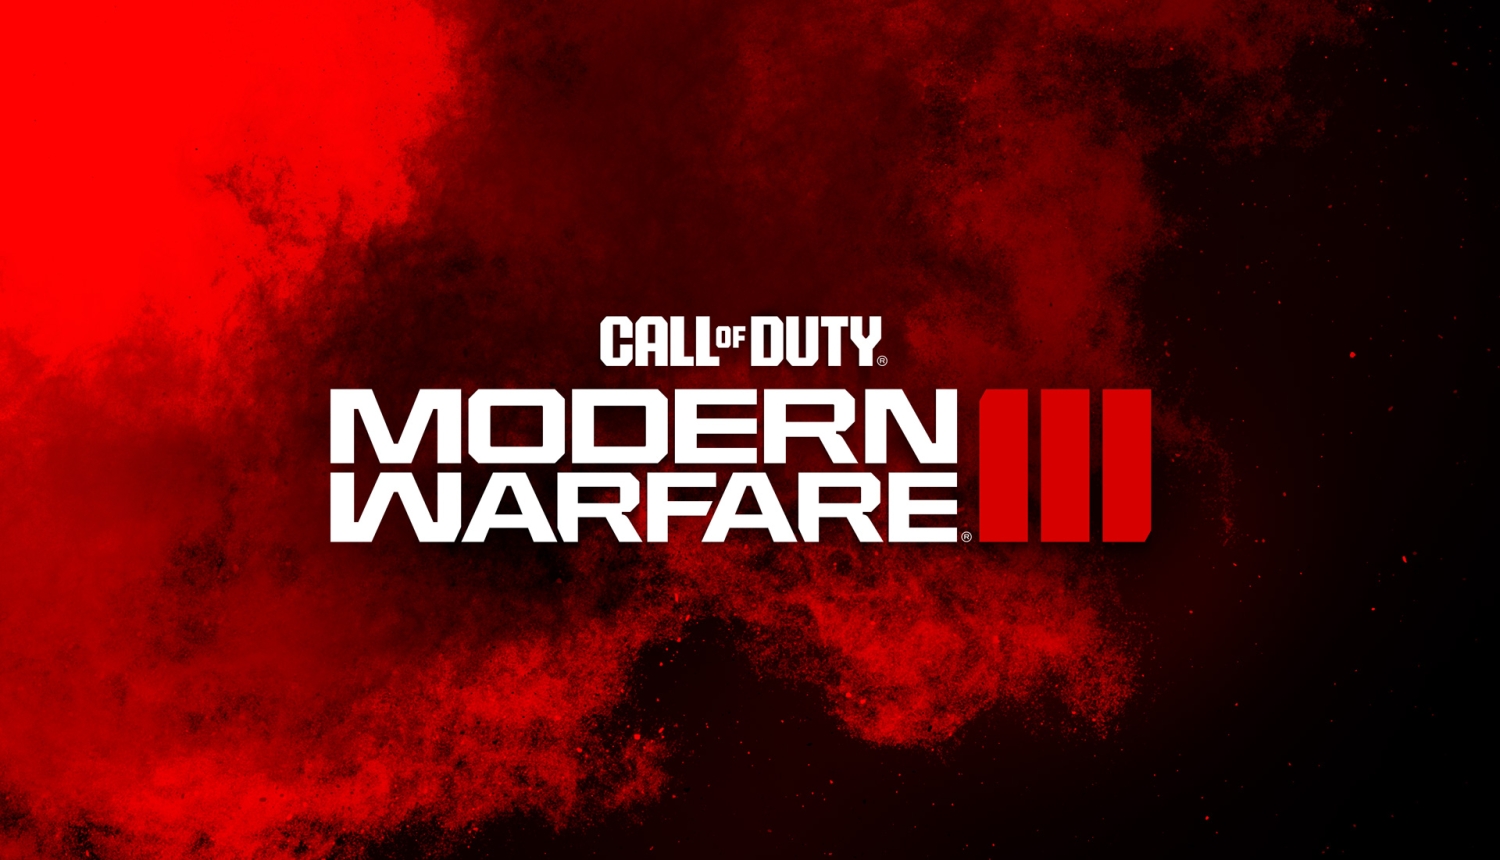 Call of Duty: Modern Warfare III sets a negative record and makes